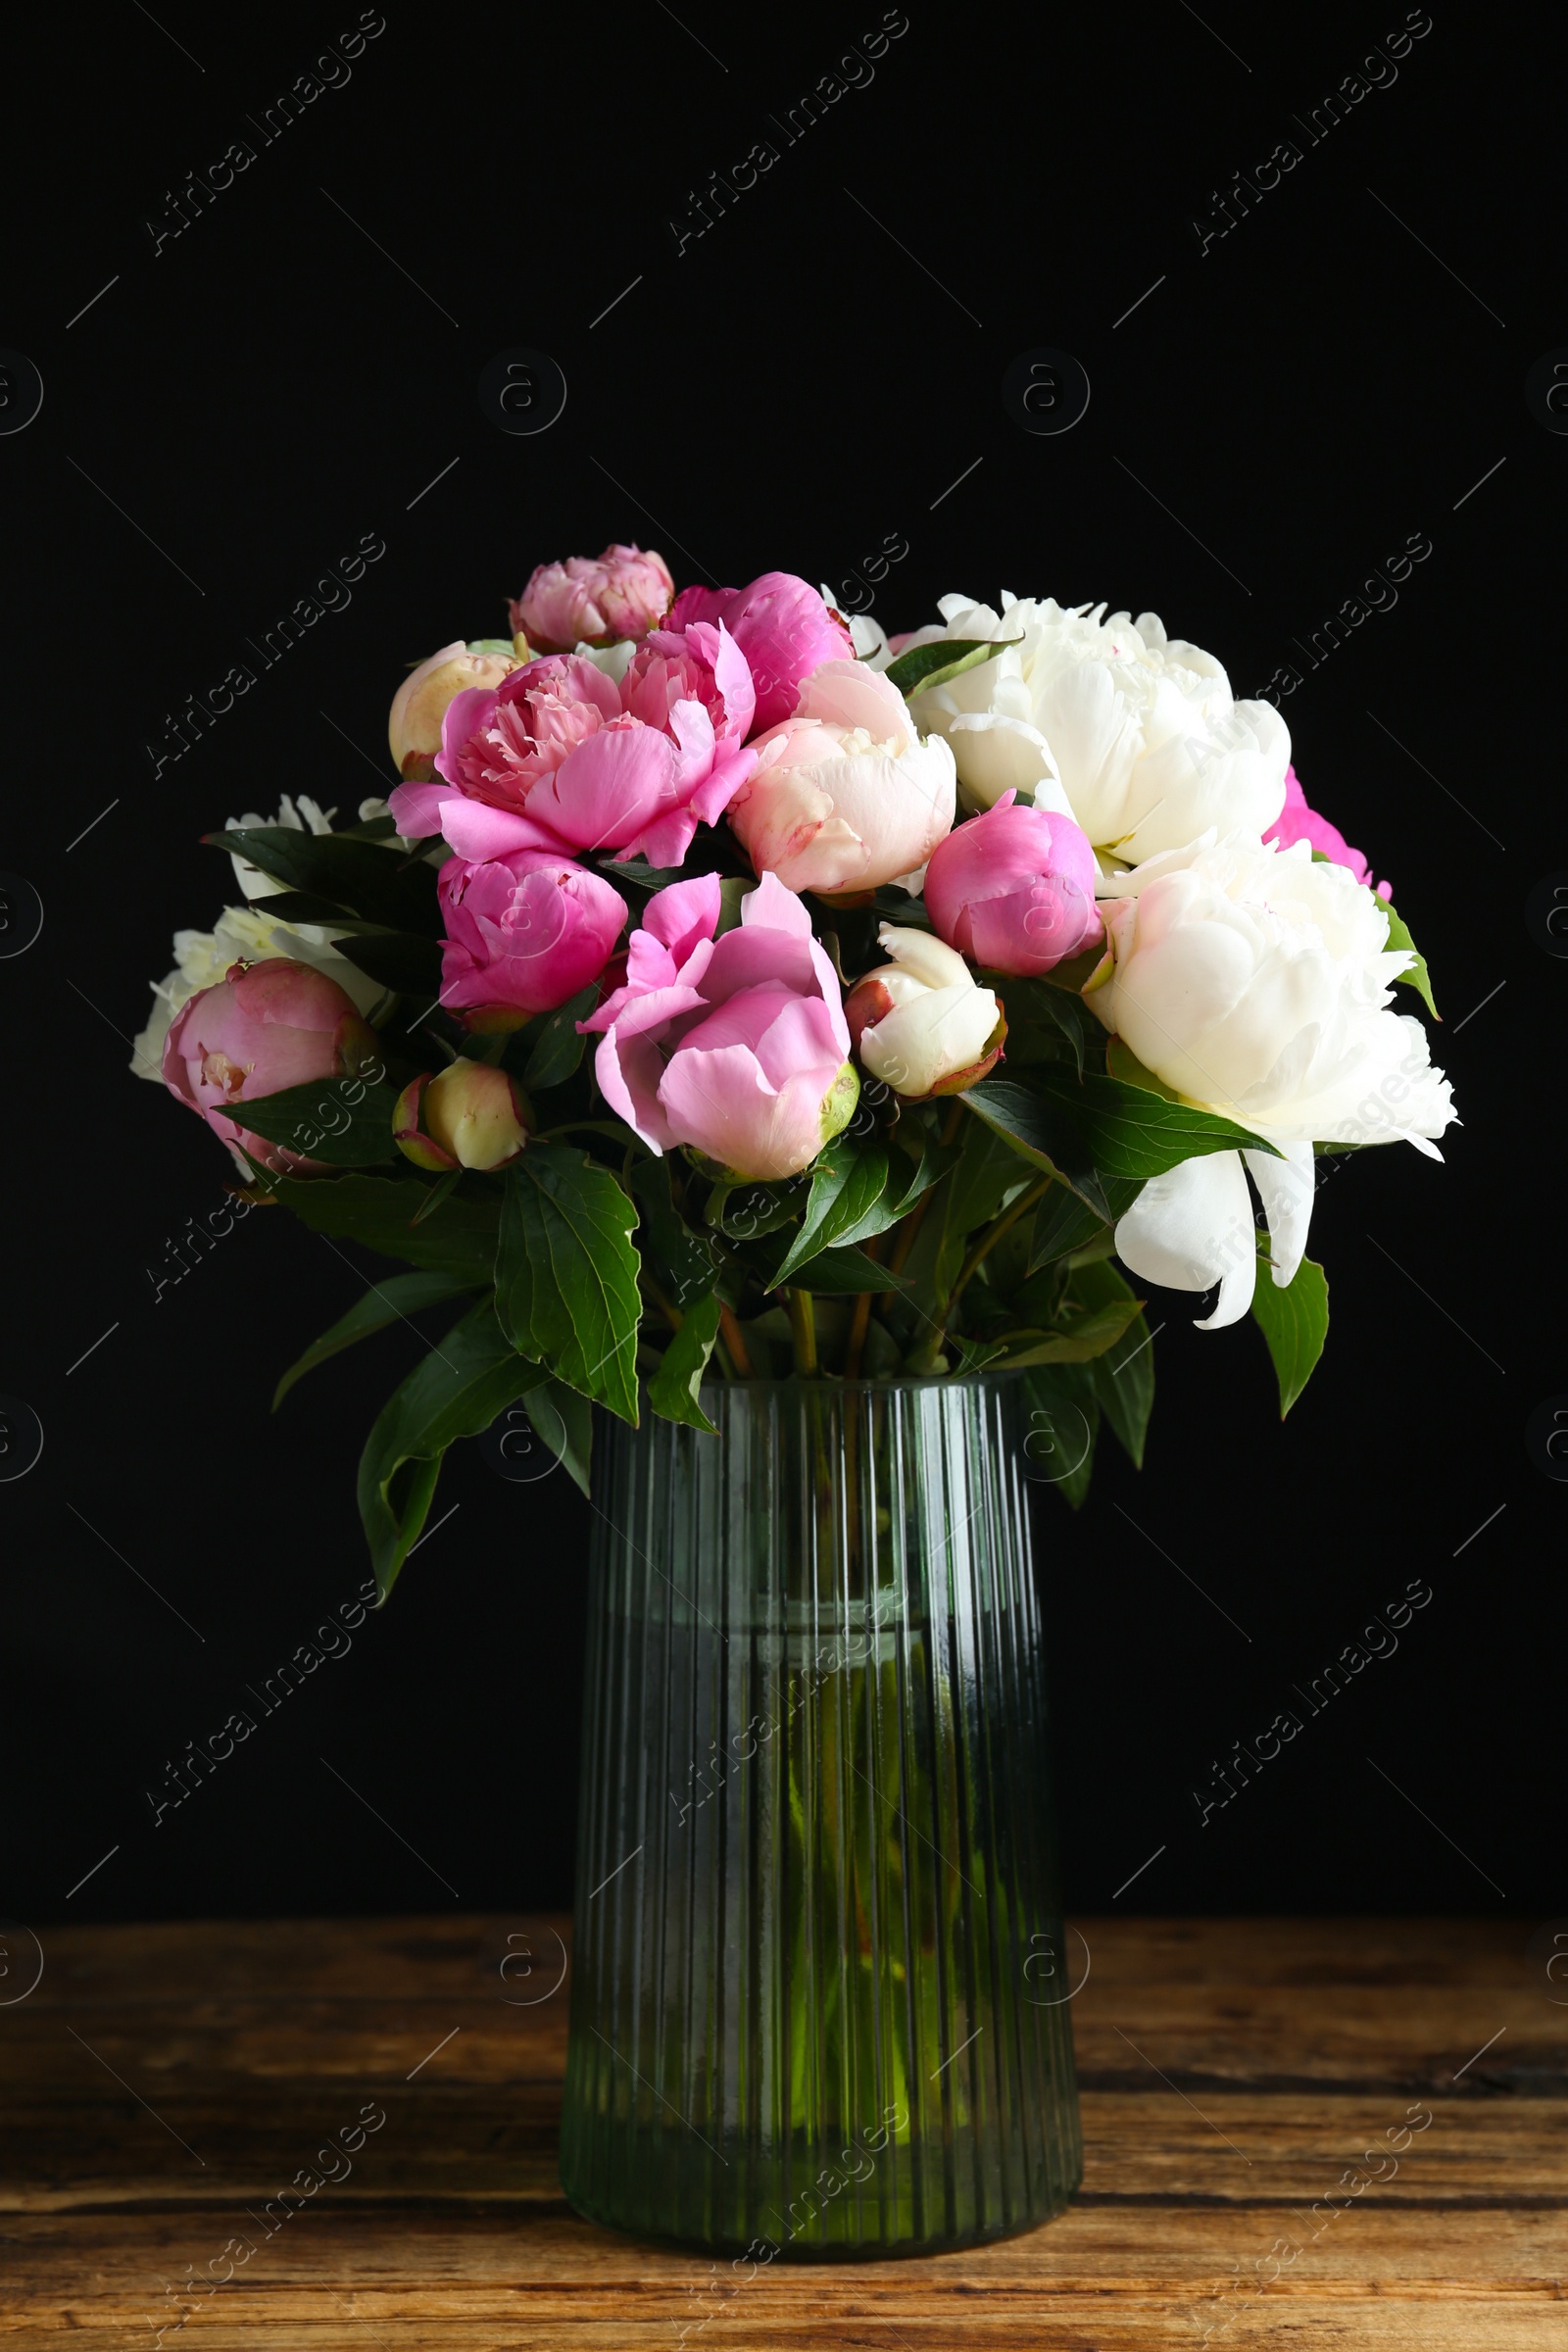 Photo of Bouquet of beautiful peonies in vase on wooden table against black background